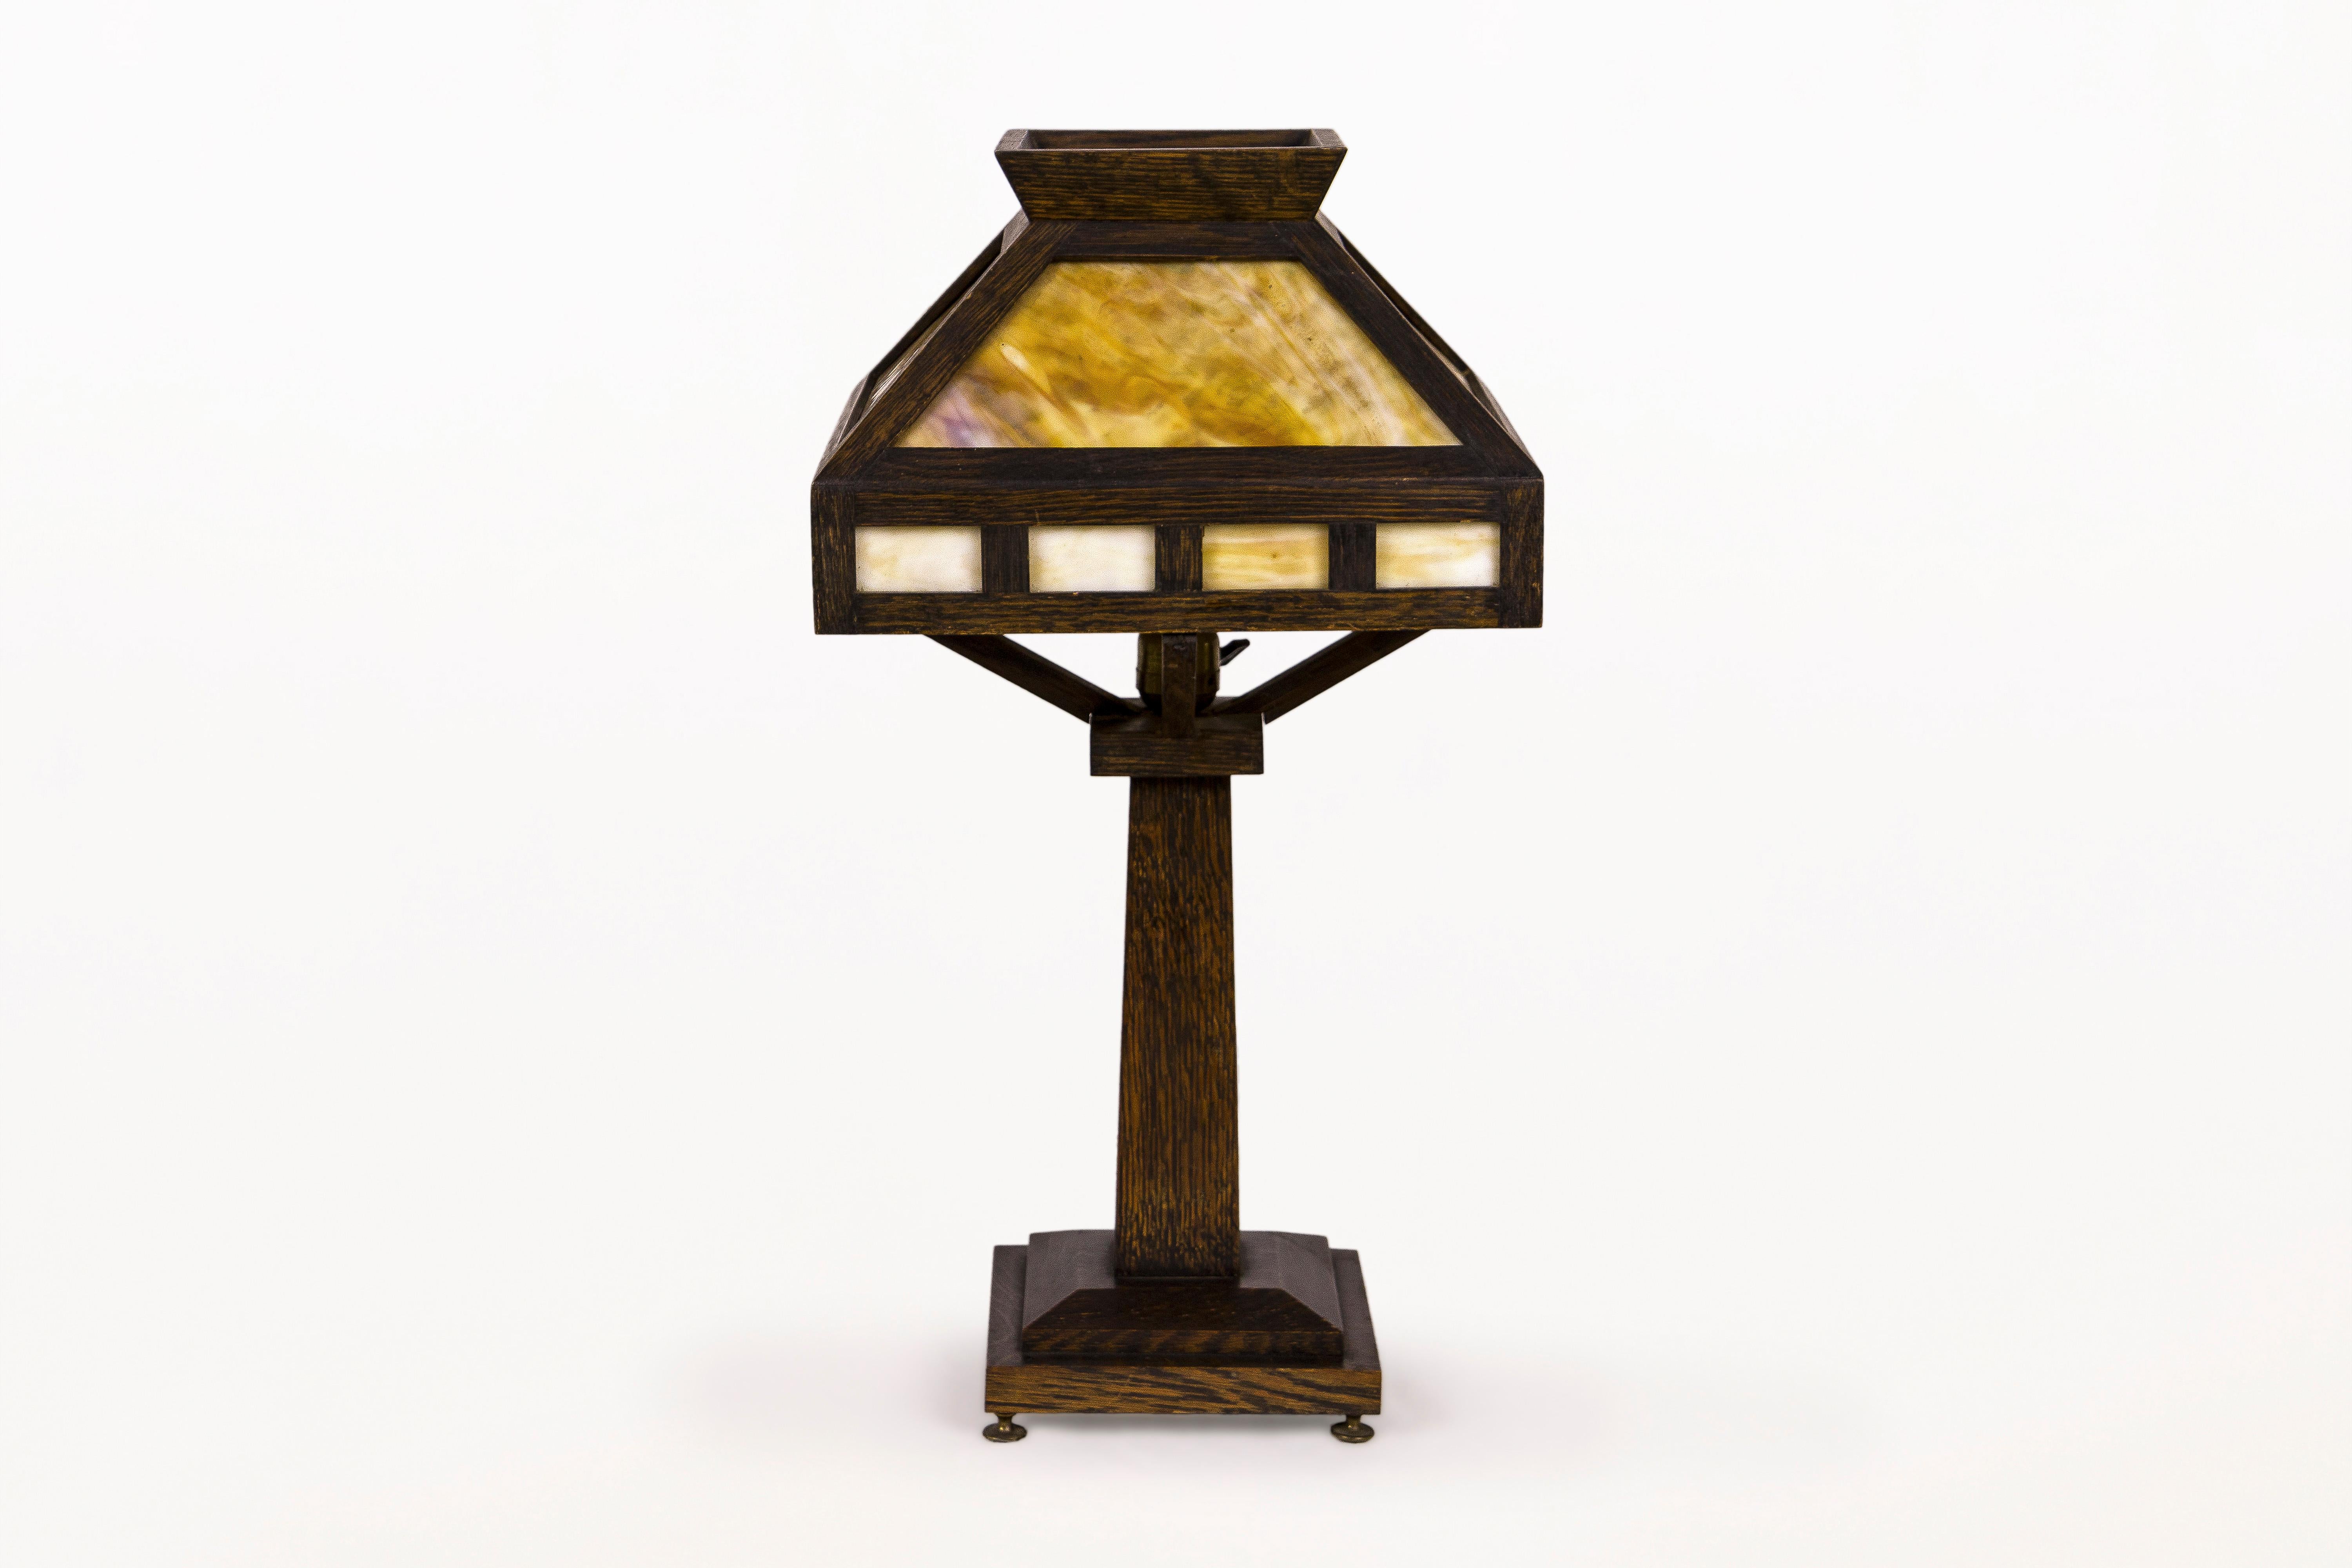 American Rustic Mission oak table lamp
Classic Arts & Crafts oak table lamp.
The lamp has a four sided shade with caramel slag glass insert and a footed base.
All original finish with a rich patina.
Lamp is in very good original condition with